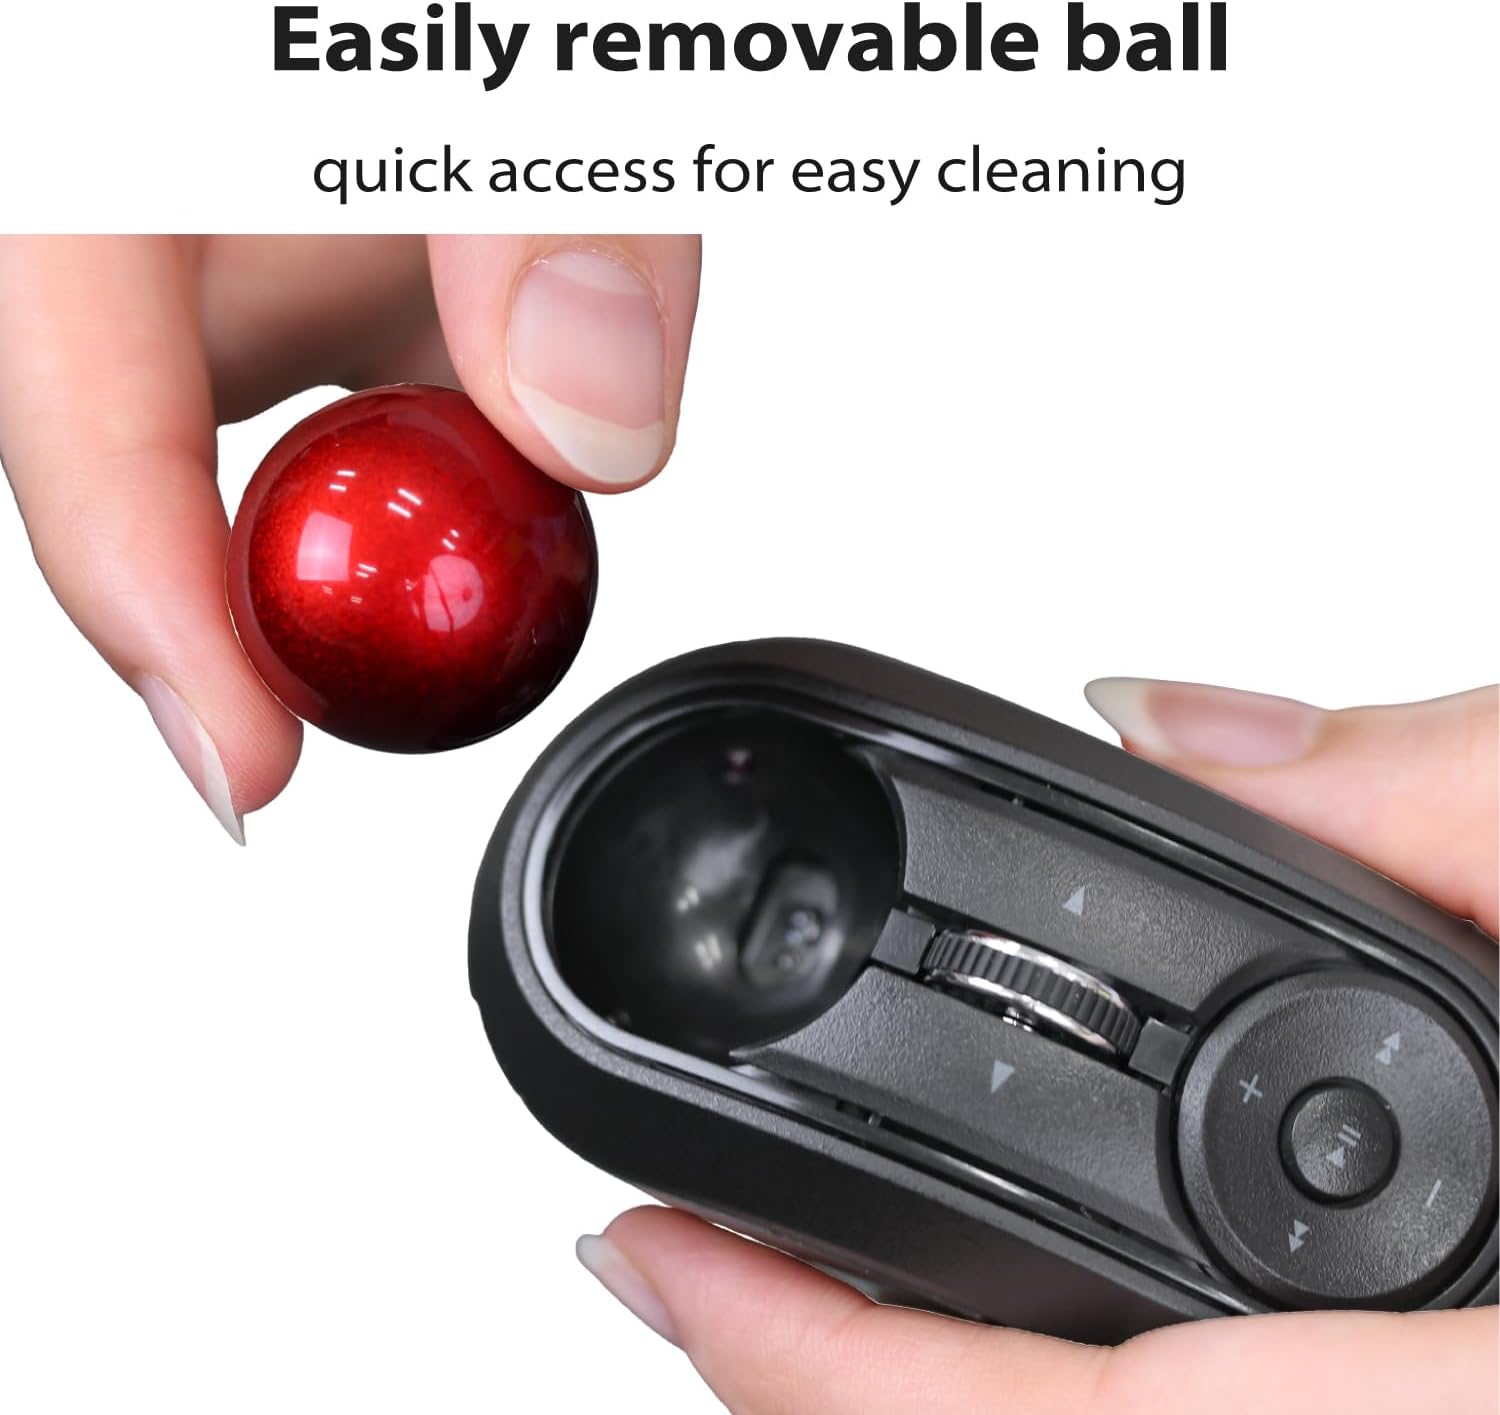 ELECOM Bluetooth Thumb Trackball Mouse for Left/Right Hand - $40